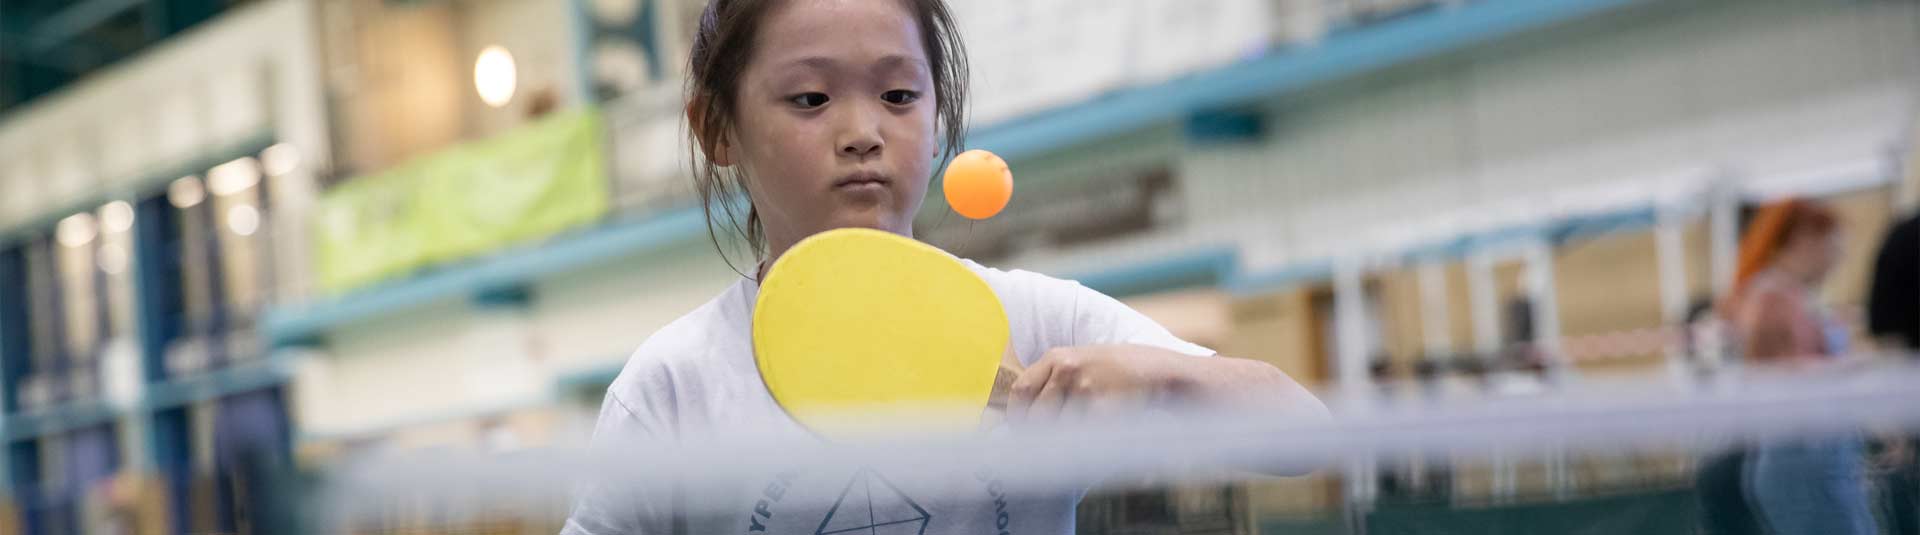 A young girl playing Table Tennis at an insport Series event